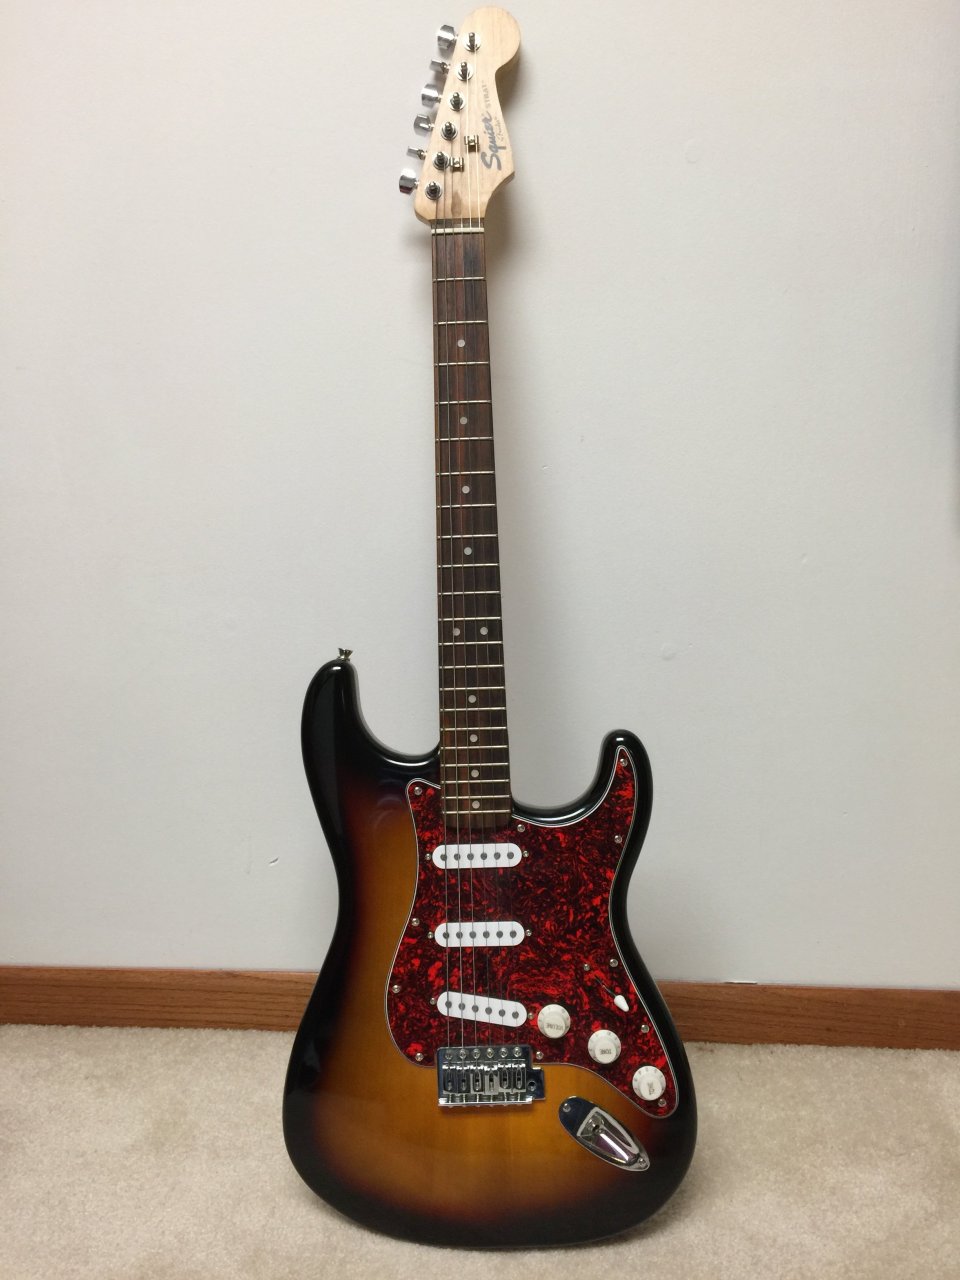 2007 Squire Strat Made In China, CXS 070923732, Is This A SE? What Is ...